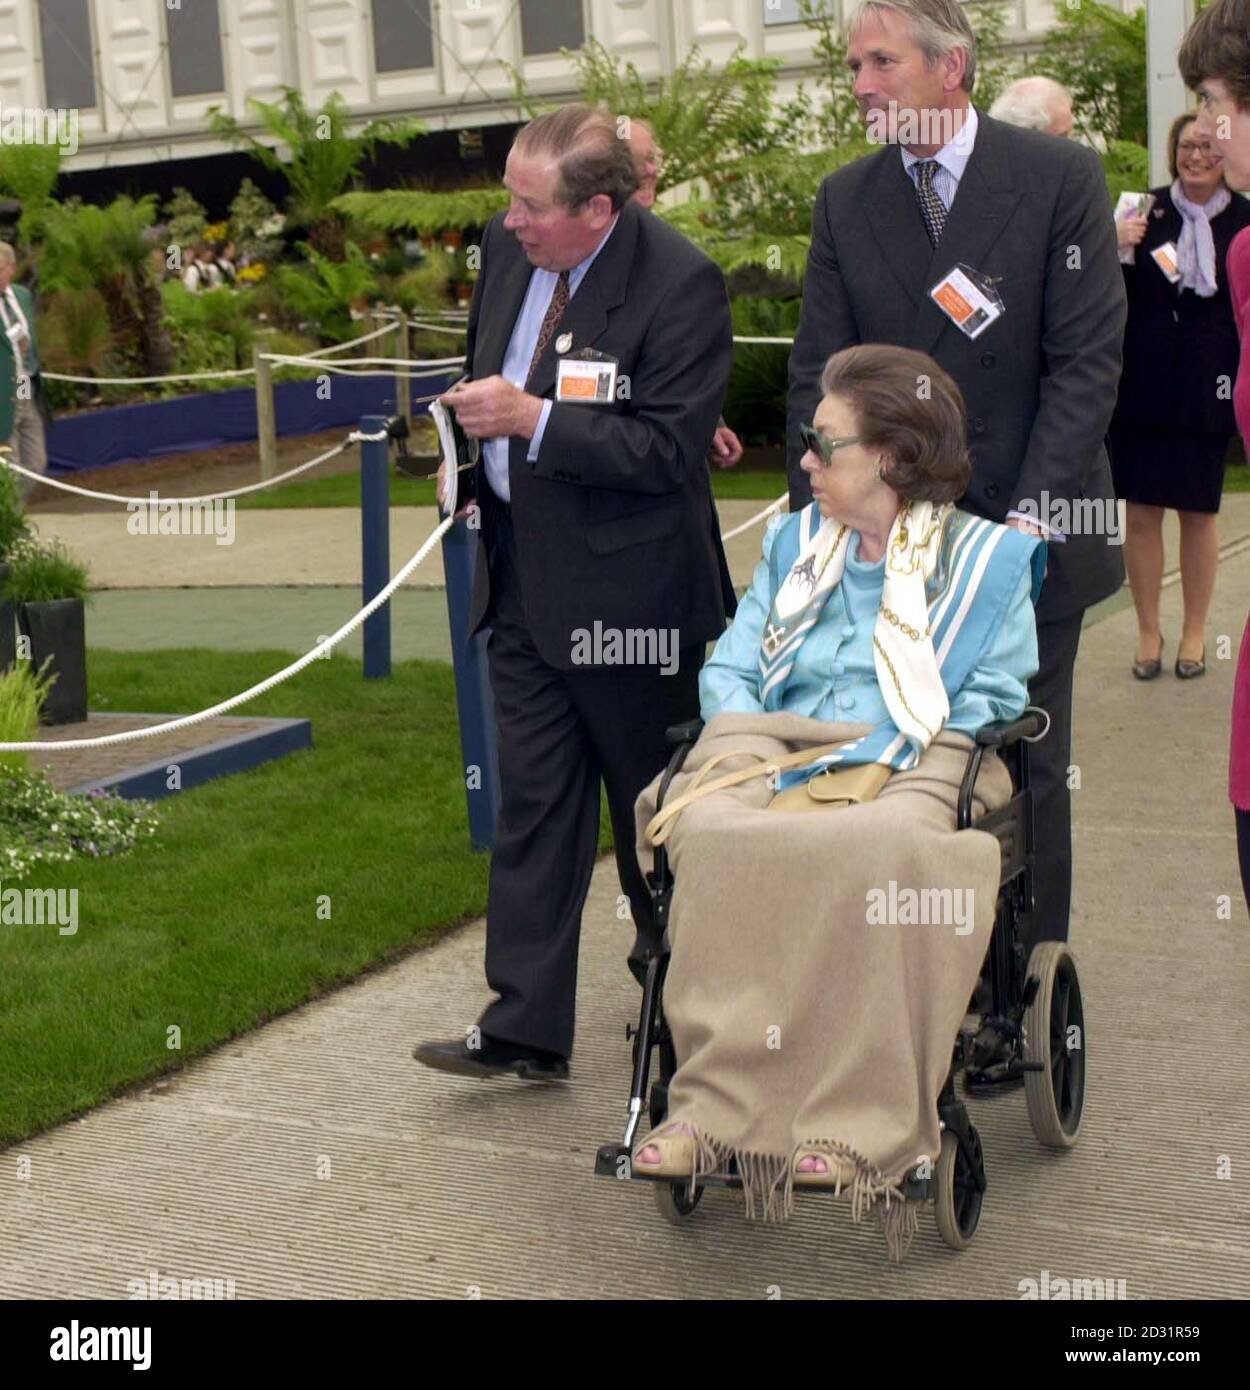 Princess Margaret, looking frail after a series of strokes, being pushed around at the Chelsea Flower Show in a wheelchair. The Queen's 70-year-old sister arrived at a side gate while other members of the Royal Family were welcomed at the main entrance. *... of the world-famous flower show. It was the first time Margaret had been seen in public since she left hospital in January after suffering her second stroke which affected her left side. Since then, she has been hit by a third stroke which impaired her vision. Determined not to miss the London flower show, Margaret wore dark glasses and Stock Photo